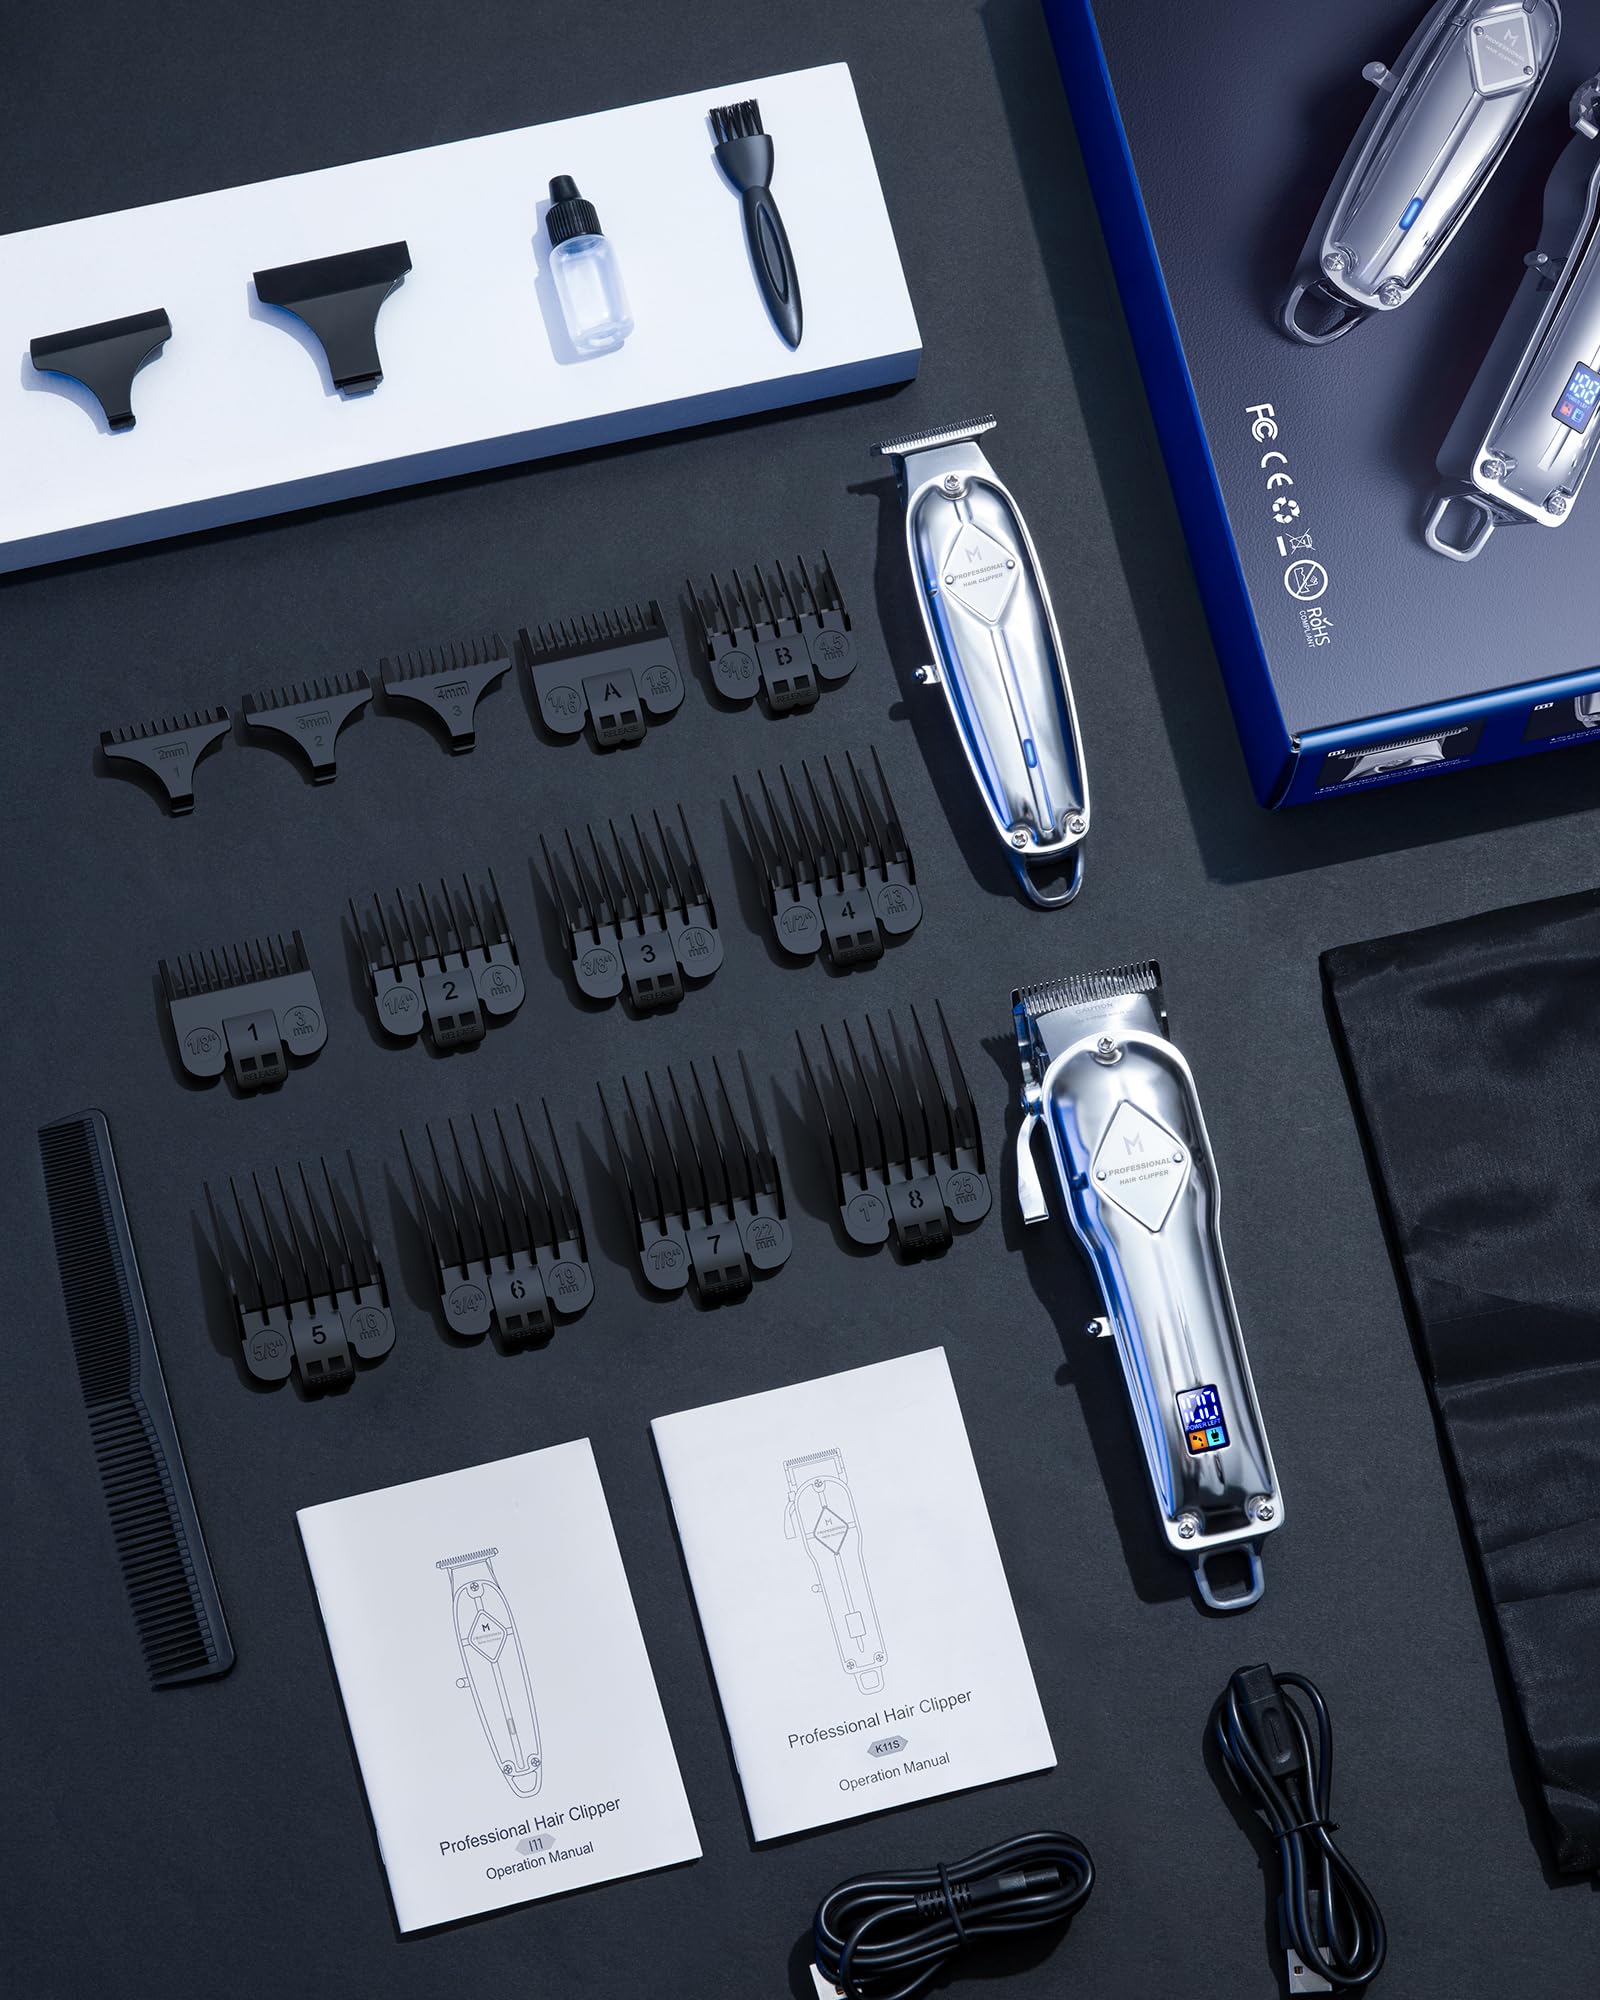 Limural Professional Hair Clippers and Trimmer Kit for Men - Cordless Barber Clipper + T Blade Outliner, Complete Hair Cutting Kits with 13 Premium Guards, LED Display, Taper Lever & 5 Hrs Runtime